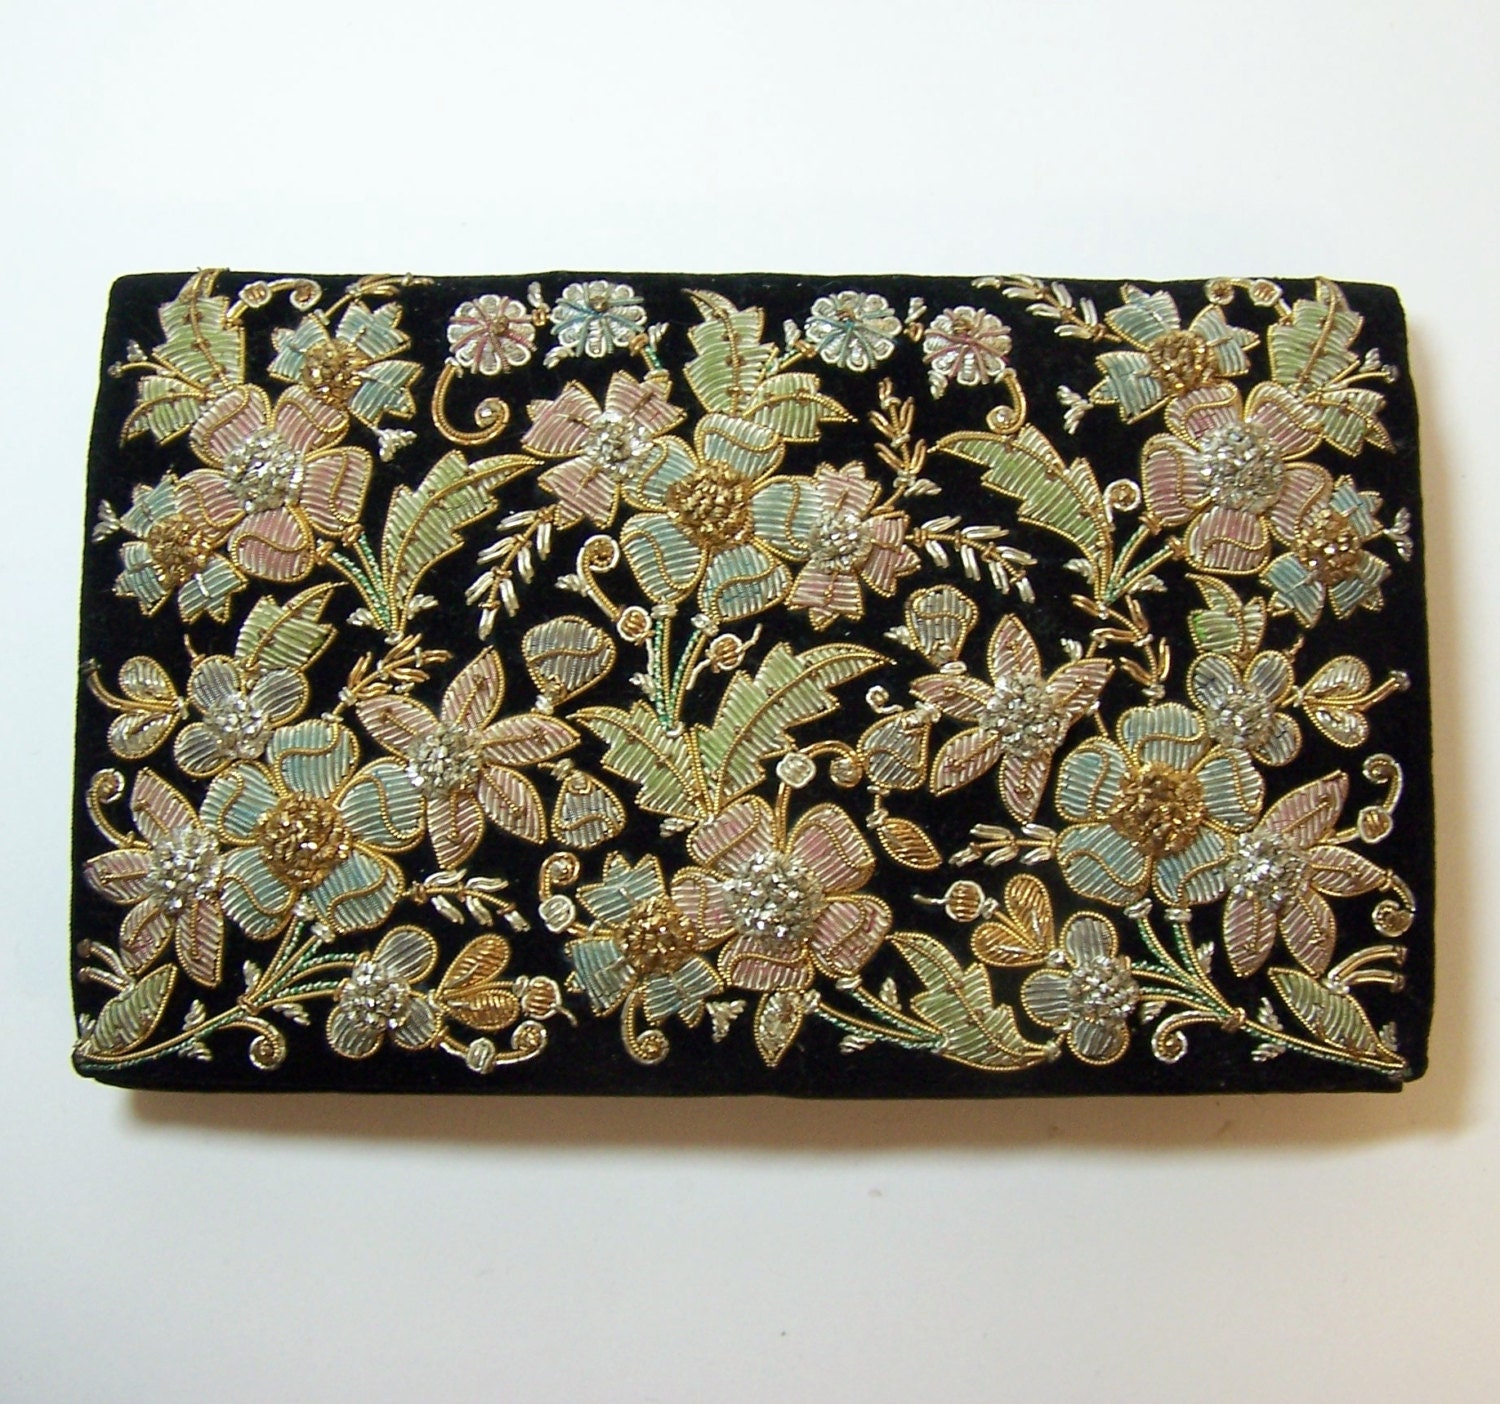 STUNNING EMBROIDERED CLUTCH Intricate Metallic Embroidery on